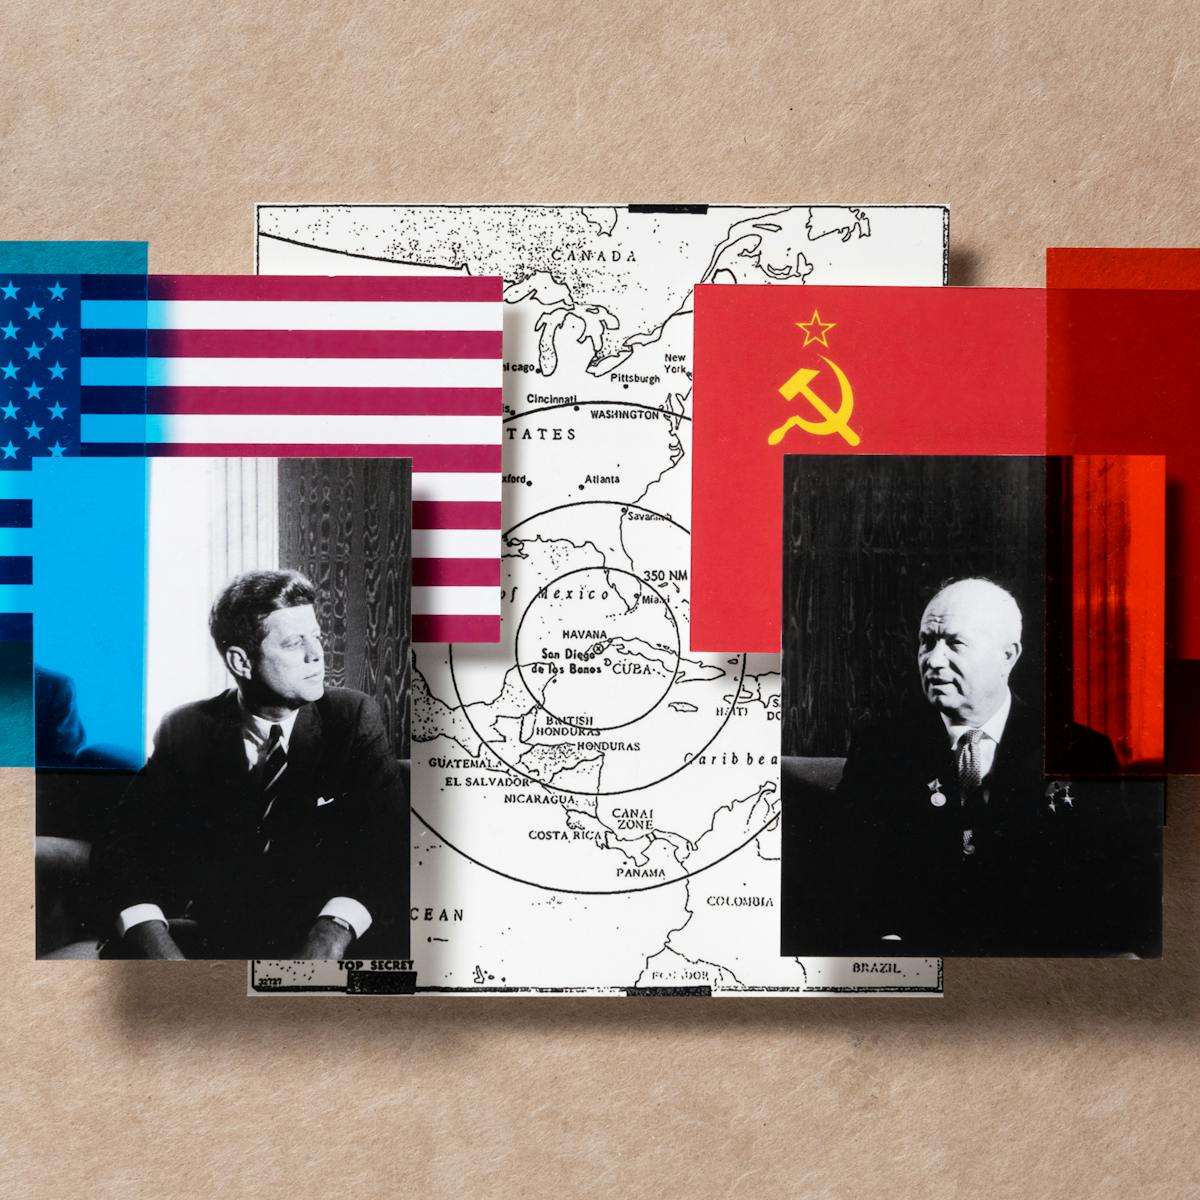 Colour photograph of 5 prints resting on a textured beige paper background. The prints are raise up slightly casting a shadow. The images are slightly overlapping. The prints on the left show the American flag and a portrait of JF Kennedy. In the centre is a map centred on Cuba with missile range rings radiating out. The prints on the right show the Russian flag and a portrait of Nikita Khrushchev. Floating above the prints are 2 rectangles of transparent red and blue gel which give a red and blue tone to the image beneath and cast a soft diffused red and blue shadow.